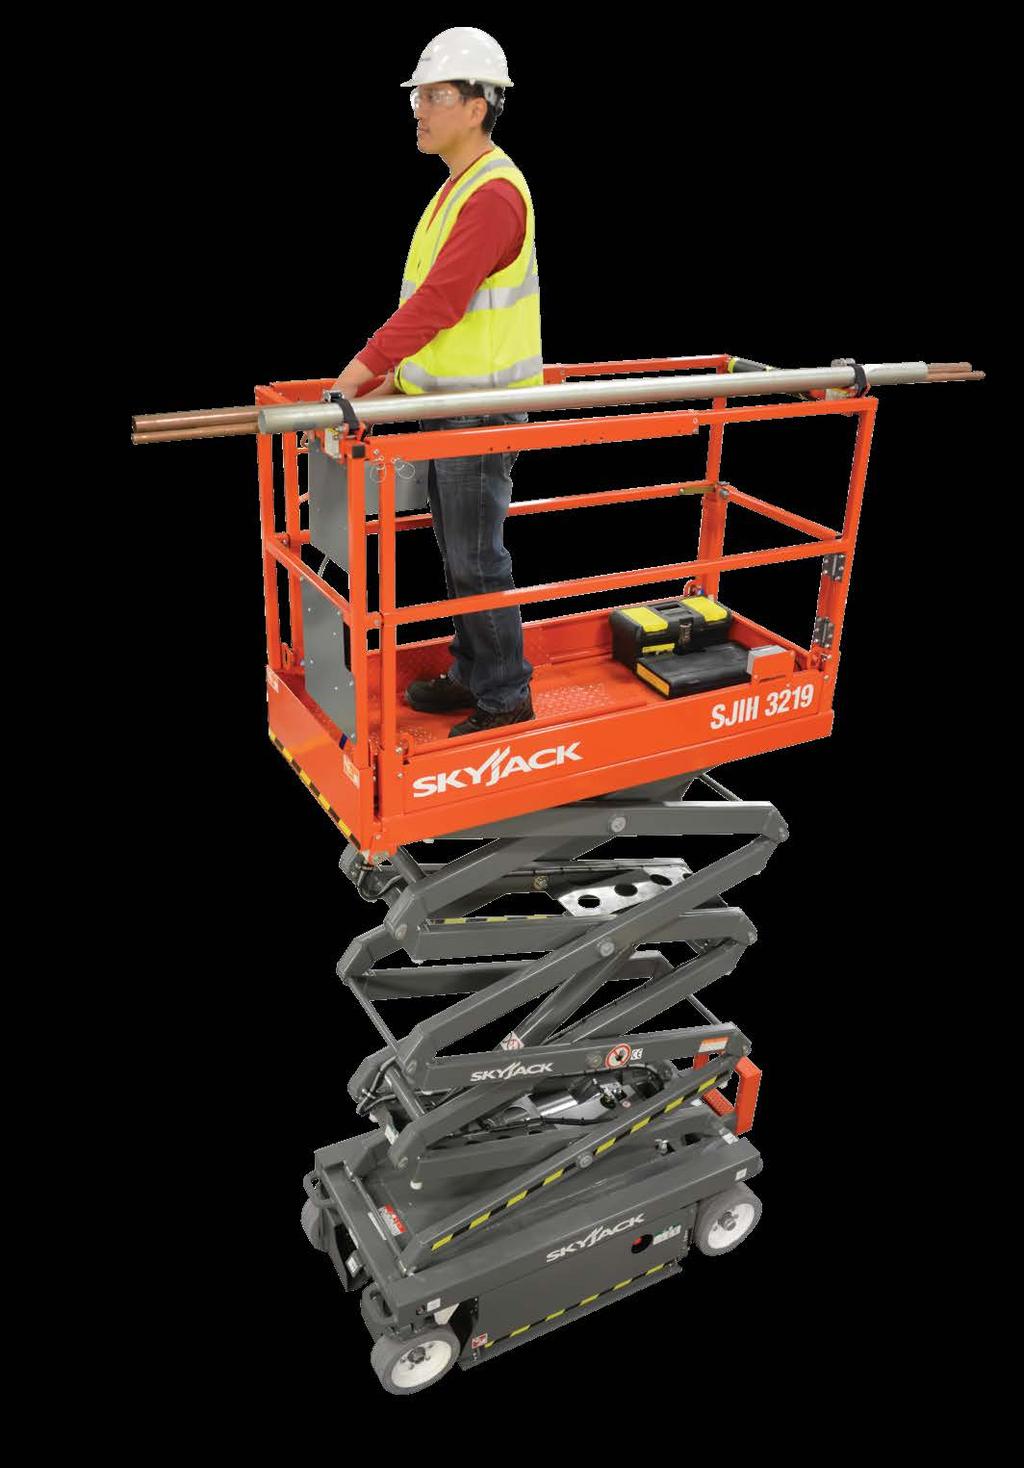 DC LIGHT DUTY PIPE RACK Designed, tested, and certified by Skyjack Skyjack s DC light duty pipe rack is meant for maximizing platform work space without sacrificing on productivity.